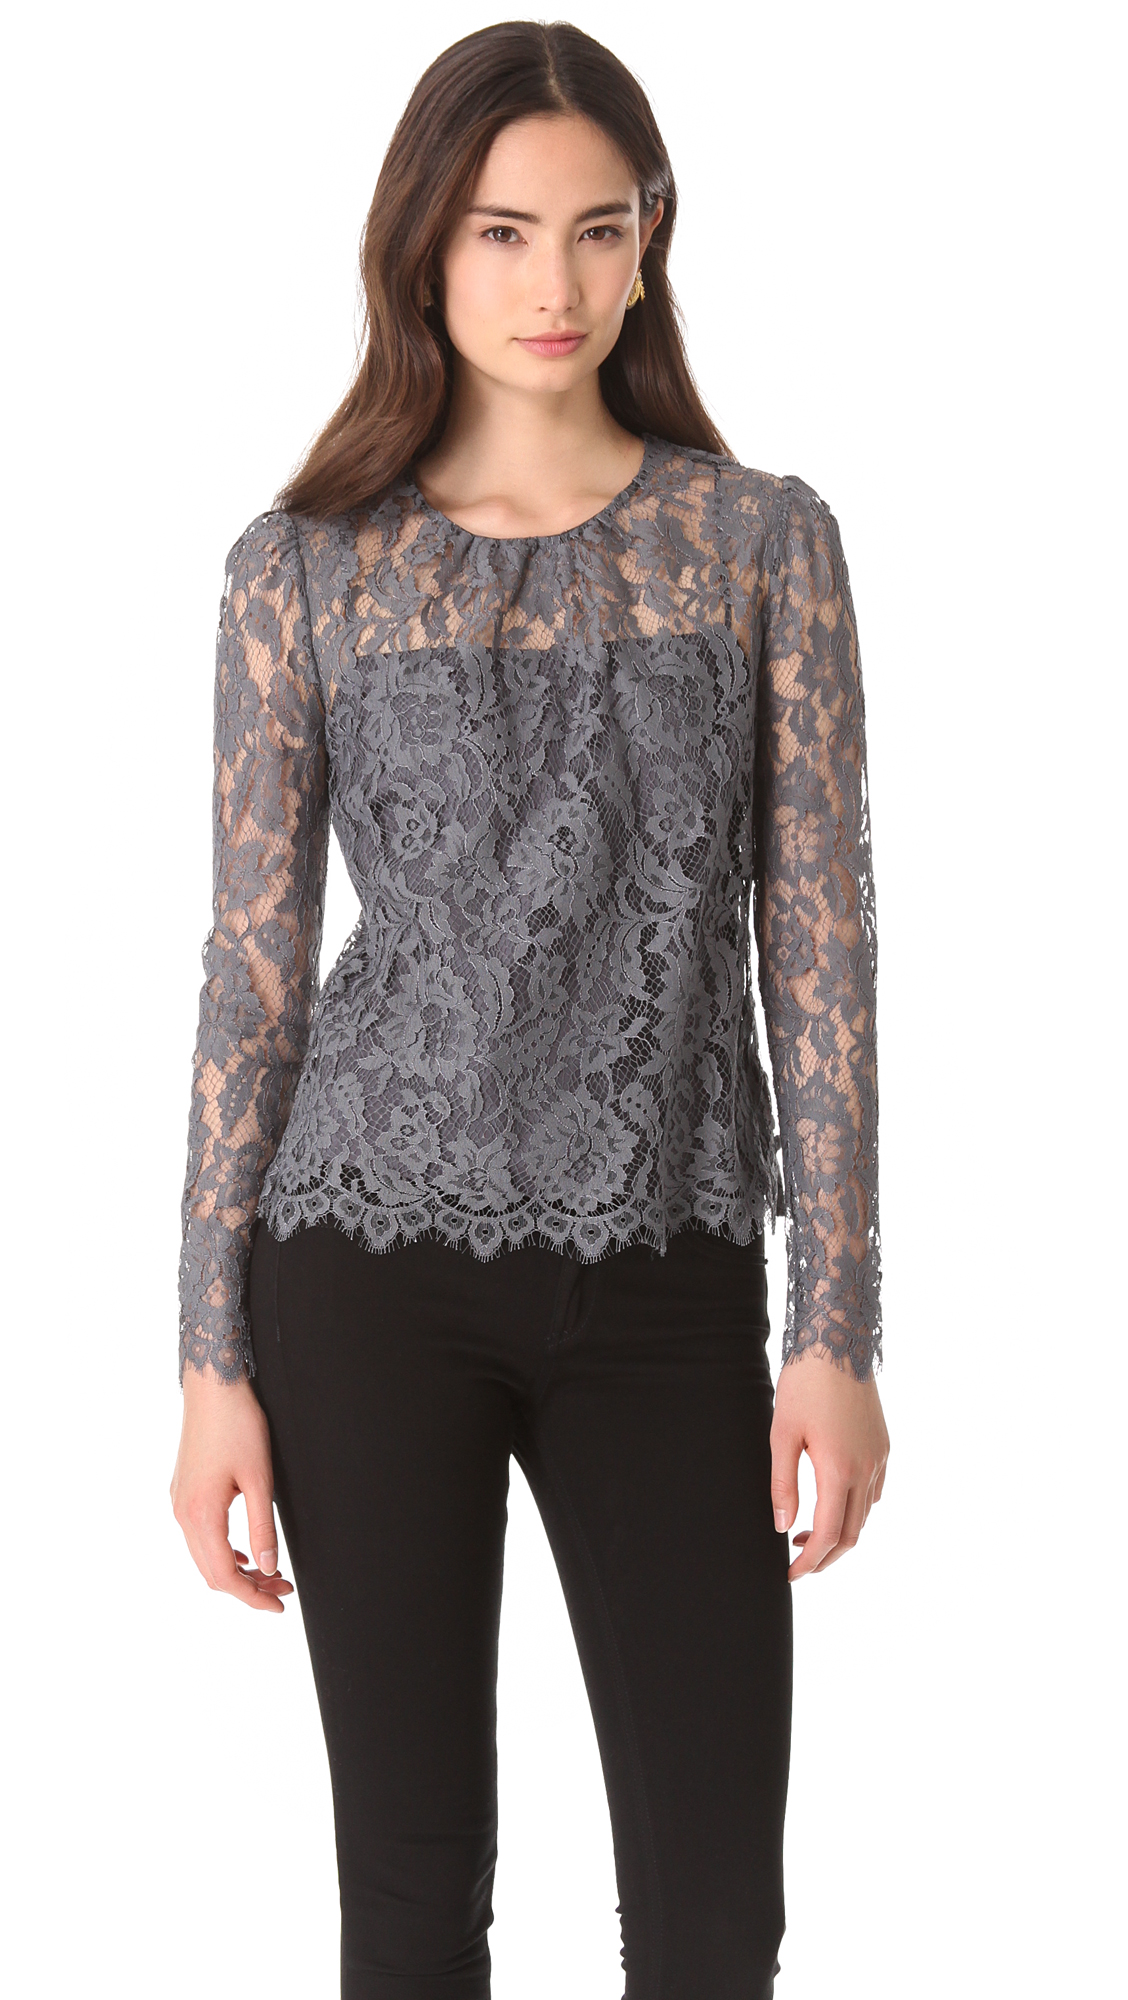 Lyst - Milly Ivy Lace Blouse in Gray